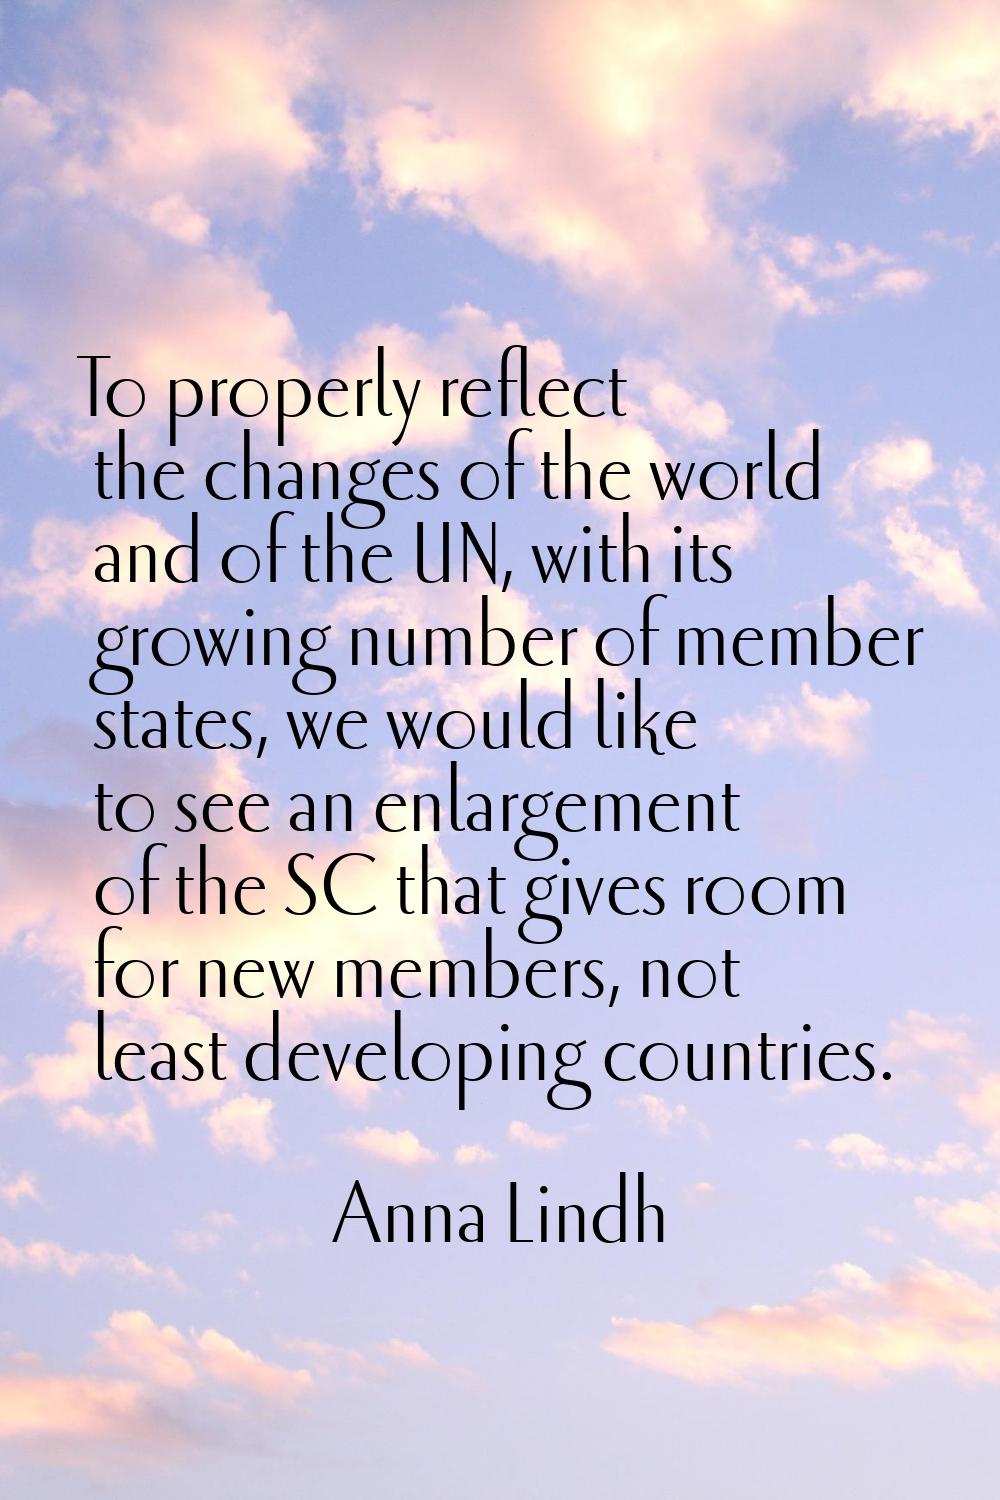 To properly reflect the changes of the world and of the UN, with its growing number of member state